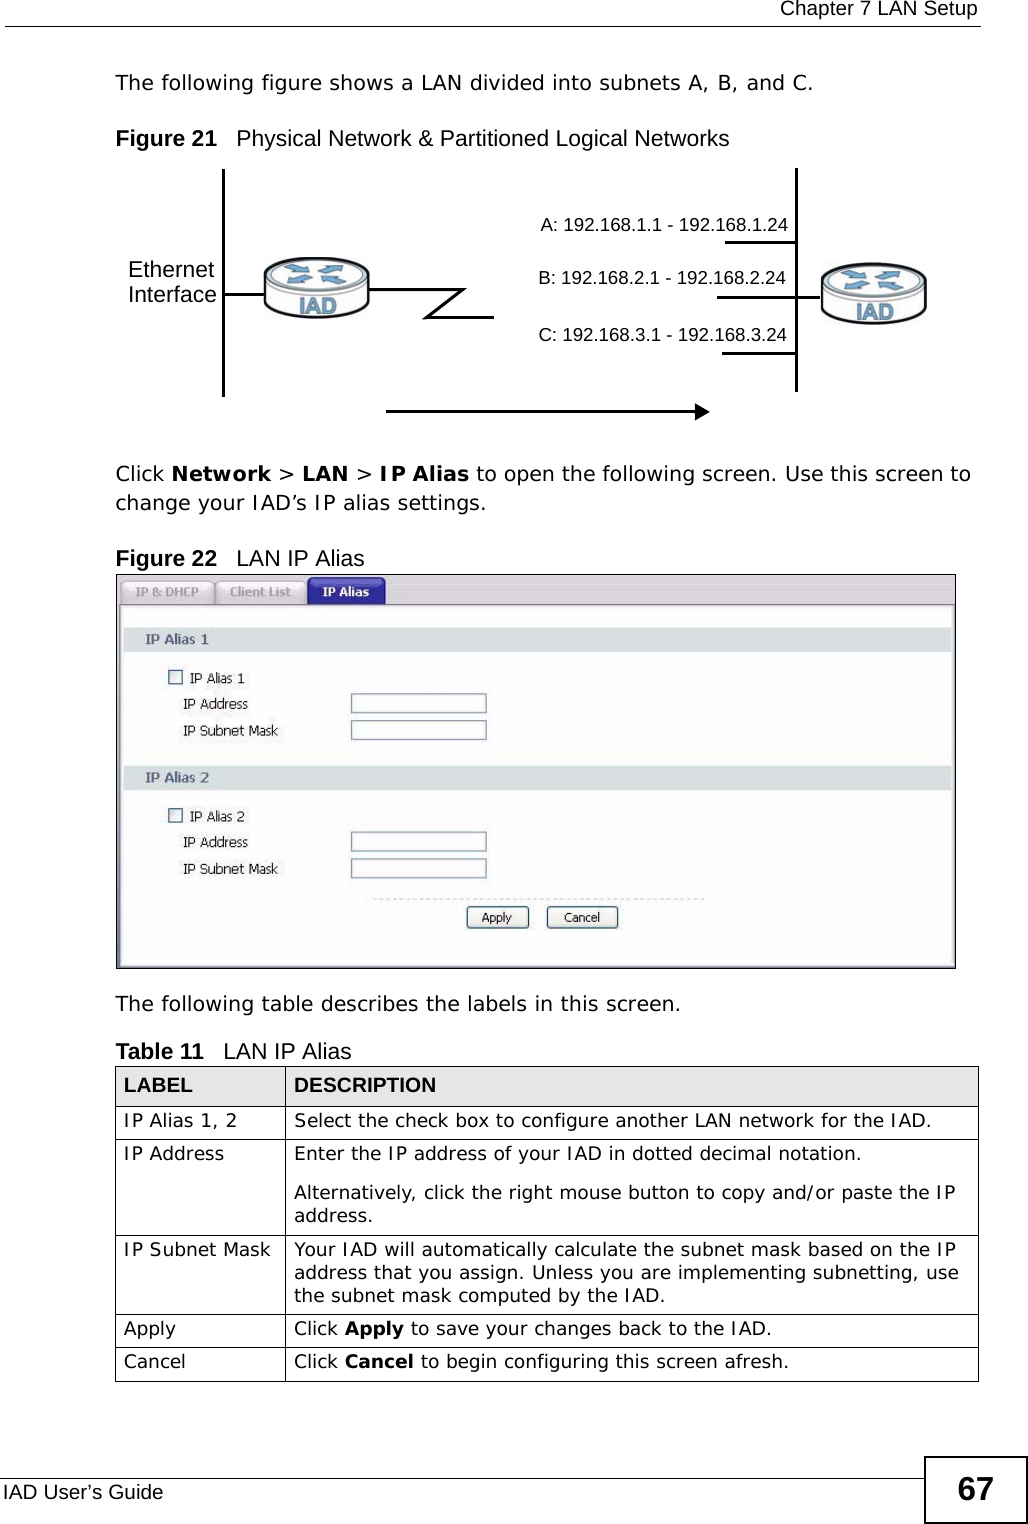  Chapter 7 LAN SetupIAD User’s Guide 67The following figure shows a LAN divided into subnets A, B, and C.Figure 21   Physical Network &amp; Partitioned Logical NetworksClick Network &gt; LAN &gt; IP Alias to open the following screen. Use this screen to change your IAD’s IP alias settings.Figure 22   LAN IP AliasThe following table describes the labels in this screen. Table 11   LAN IP Alias LABEL DESCRIPTIONIP Alias 1, 2 Select the check box to configure another LAN network for the IAD.IP Address Enter the IP address of your IAD in dotted decimal notation. Alternatively, click the right mouse button to copy and/or paste the IP address.IP Subnet Mask Your IAD will automatically calculate the subnet mask based on the IP address that you assign. Unless you are implementing subnetting, use the subnet mask computed by the IAD.Apply Click Apply to save your changes back to the IAD.Cancel Click Cancel to begin configuring this screen afresh.EthernetInterfaceA: 192.168.1.1 - 192.168.1.24B: 192.168.2.1 - 192.168.2.24C: 192.168.3.1 - 192.168.3.24